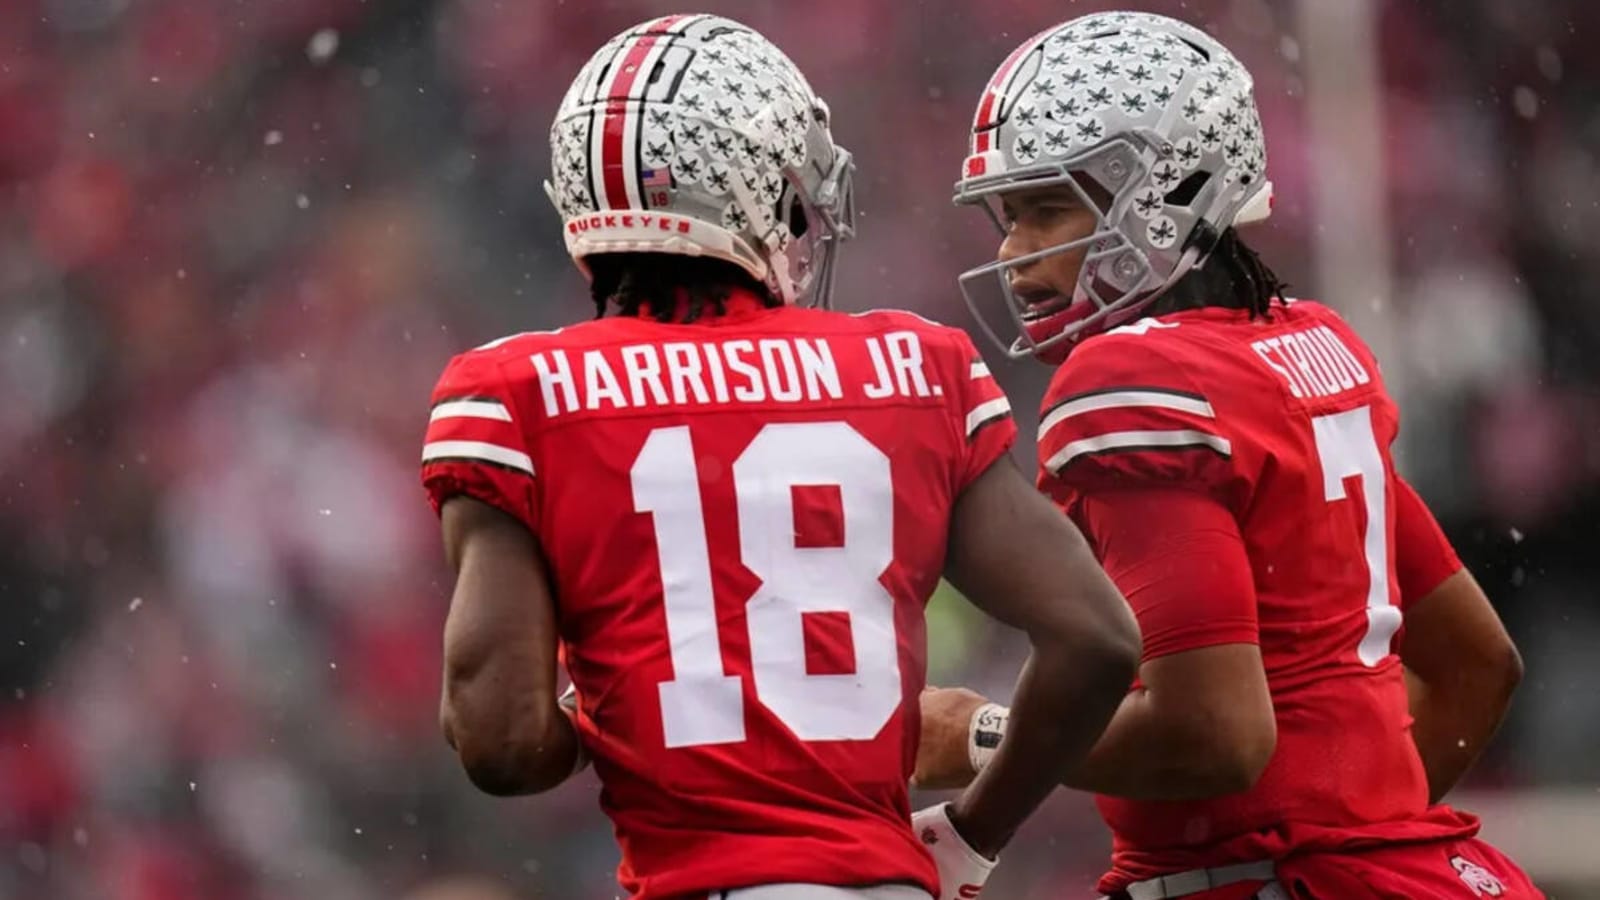 Marvin Harrison Jr. is in line to be the next award-winning NFL rookie out of Ohio State